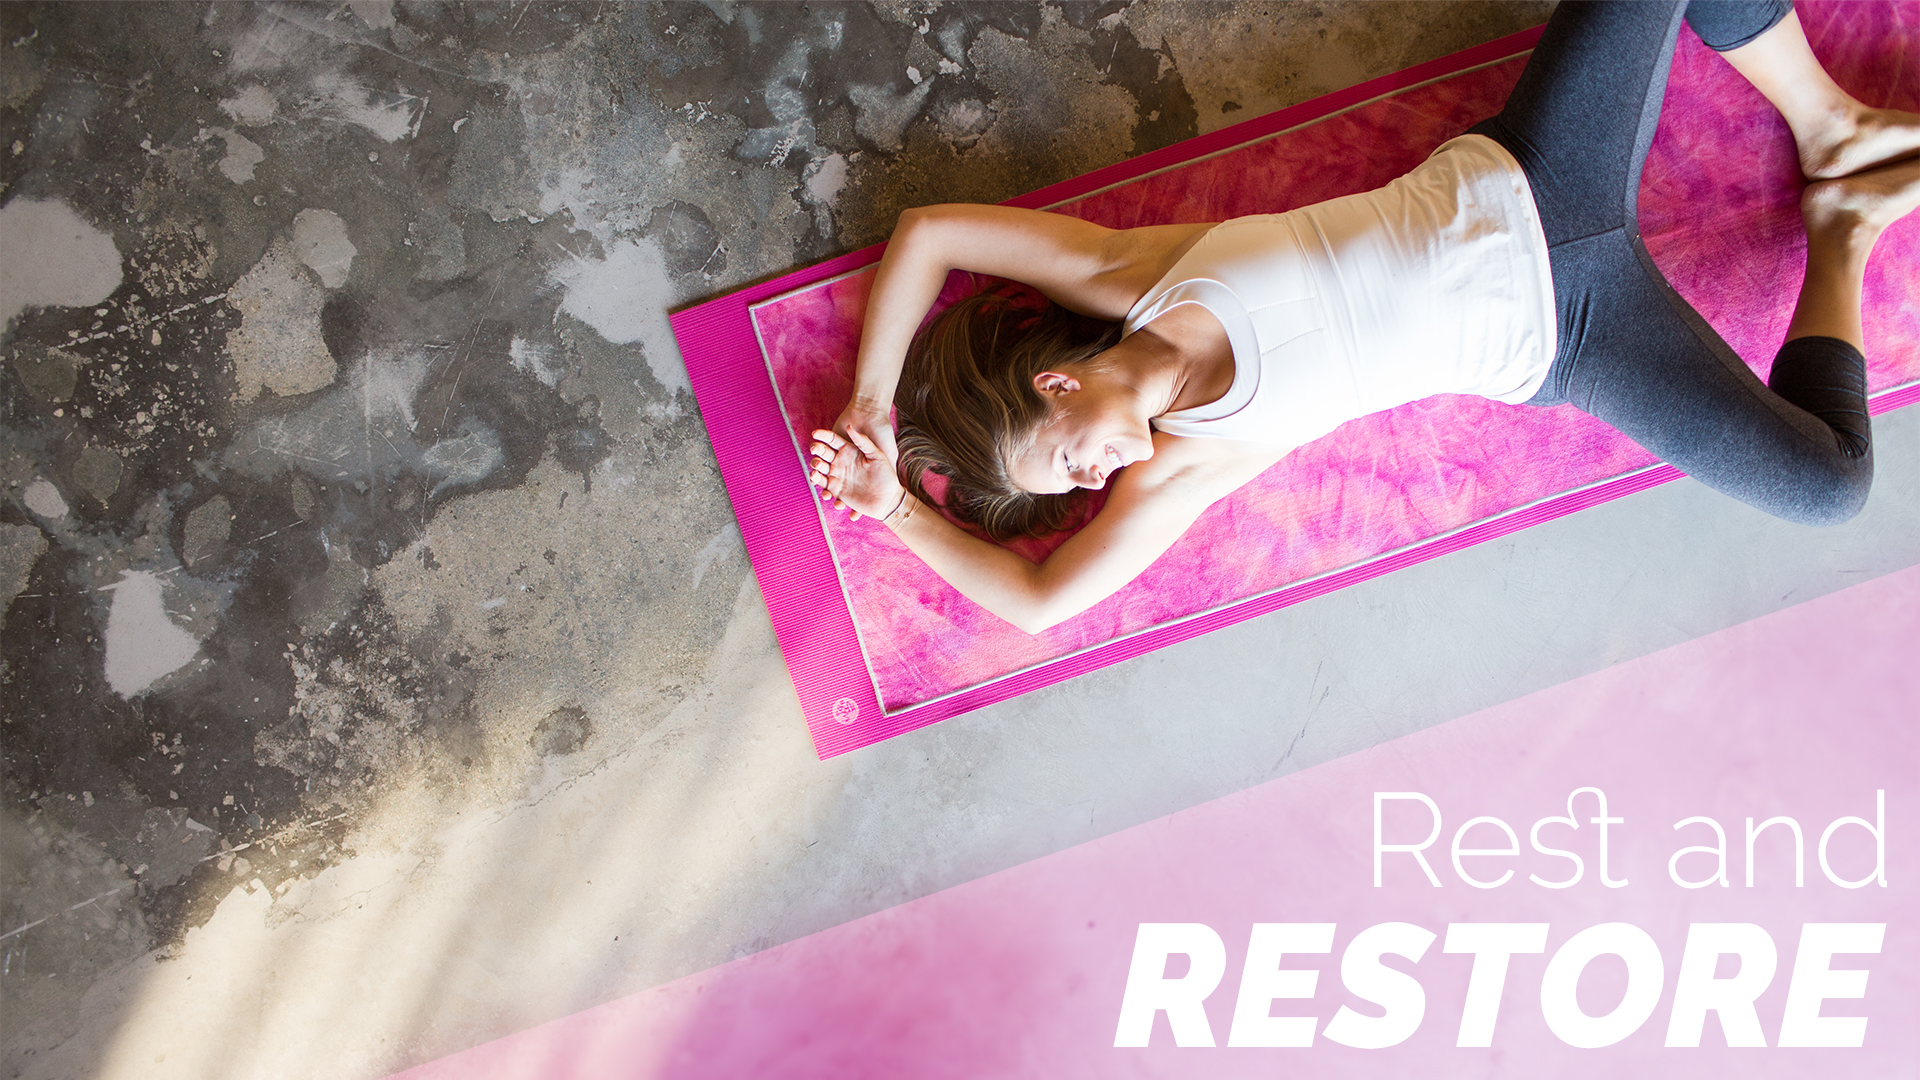 Rest and RESTORE